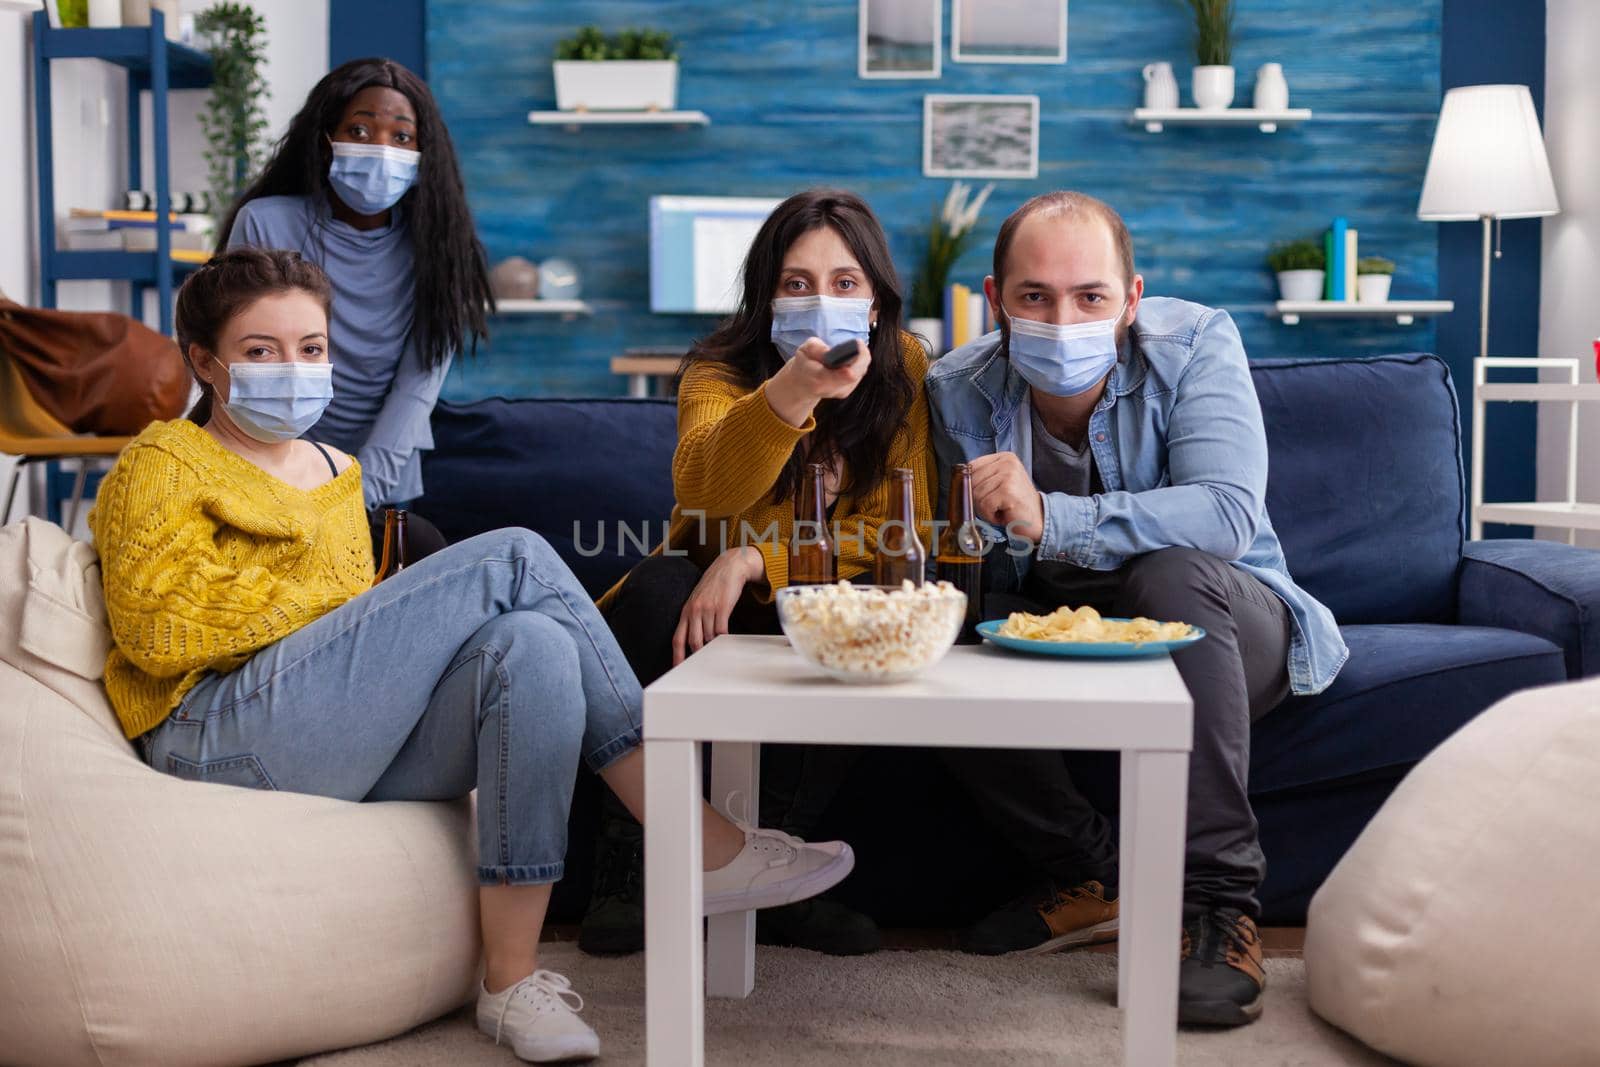 Pov of multiethnic friends using tv remote control to change channel sitting on sofa wearing face mask during covid pandemic outbreak as prevention against spread having fun.